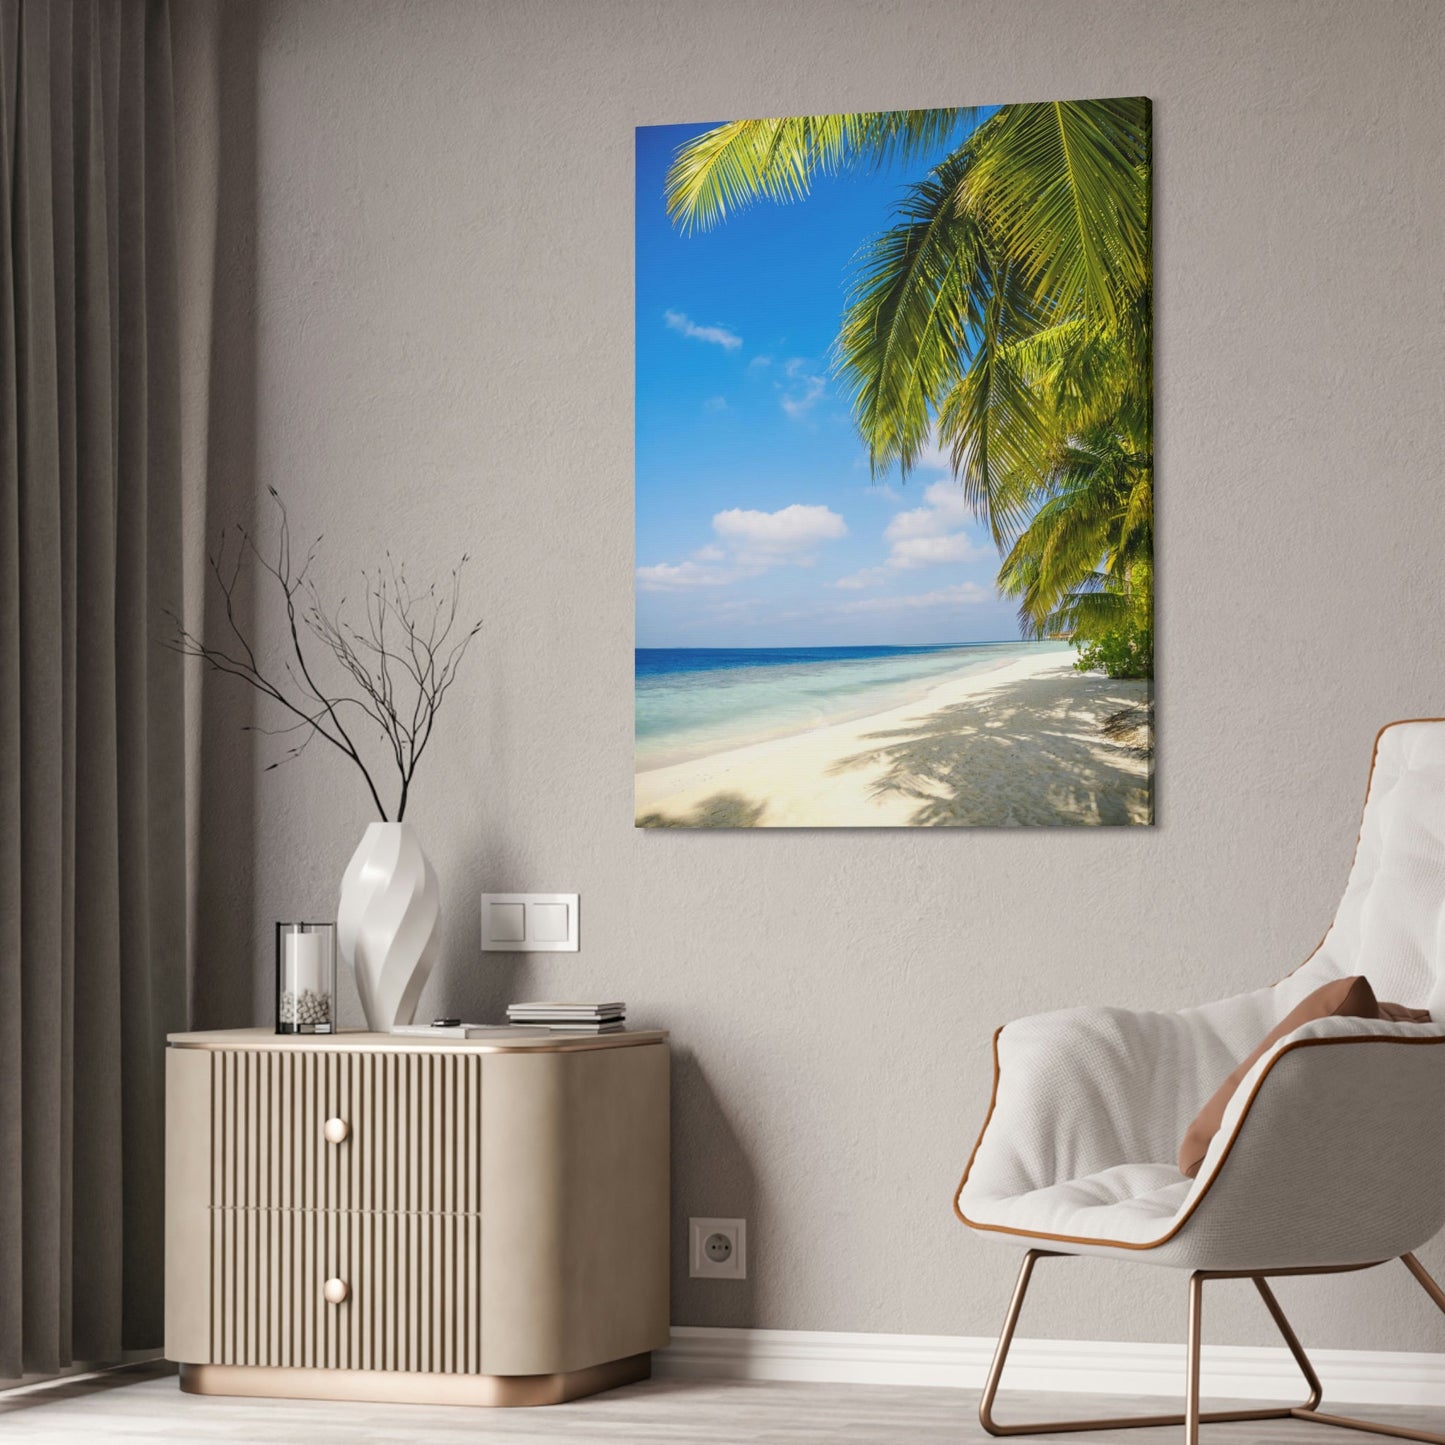 Shores of Serenity: Wall Art of an Island Beach on a Natural Canvas & Poster